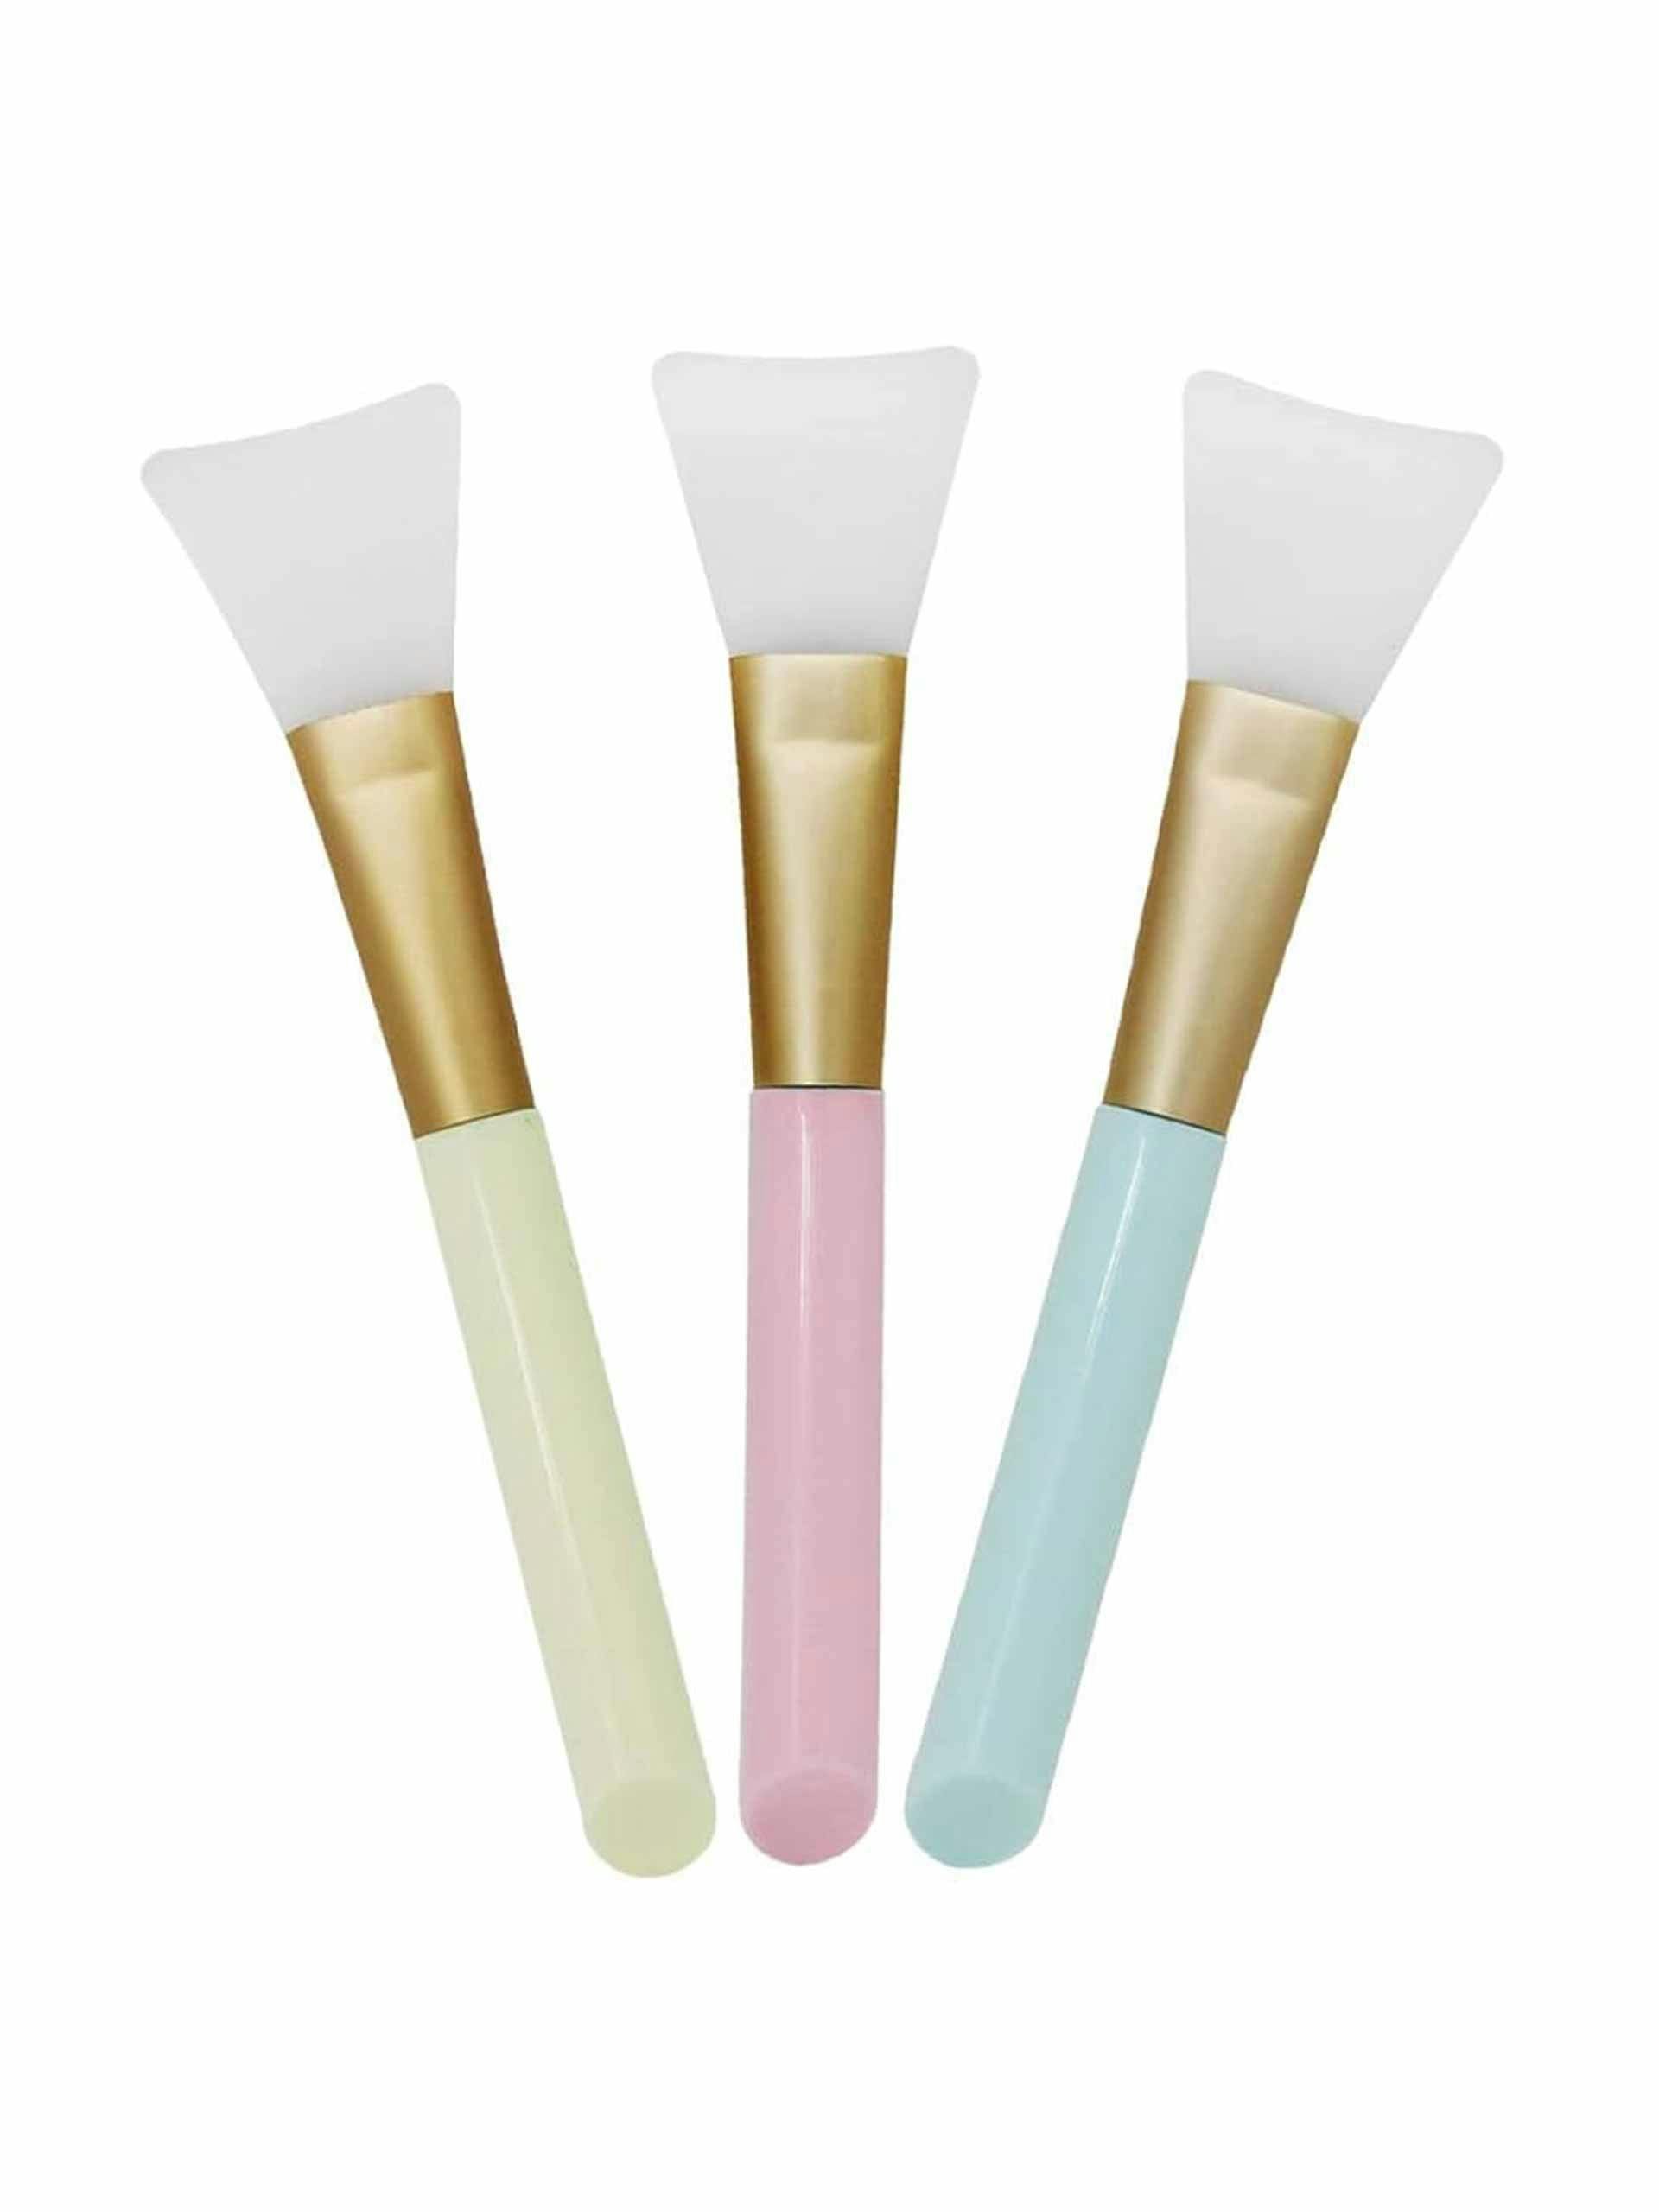 Silicone face mask brushes (pack of 3)